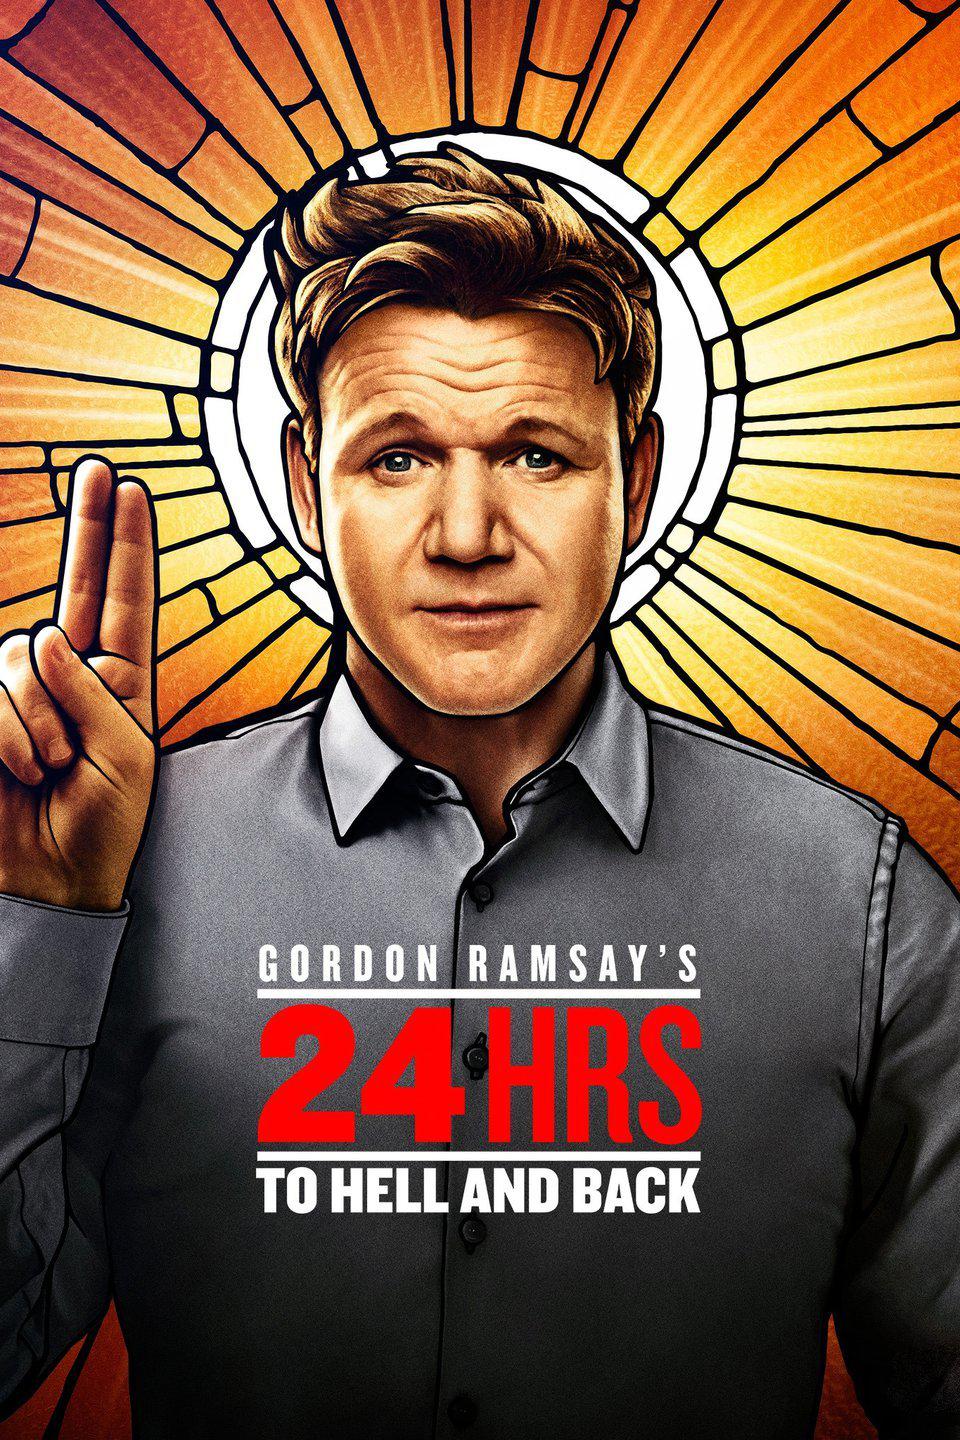 TV ratings for Gordon Ramsay's 24 Hours To Hell And Back in Países Bajos. FOX TV series